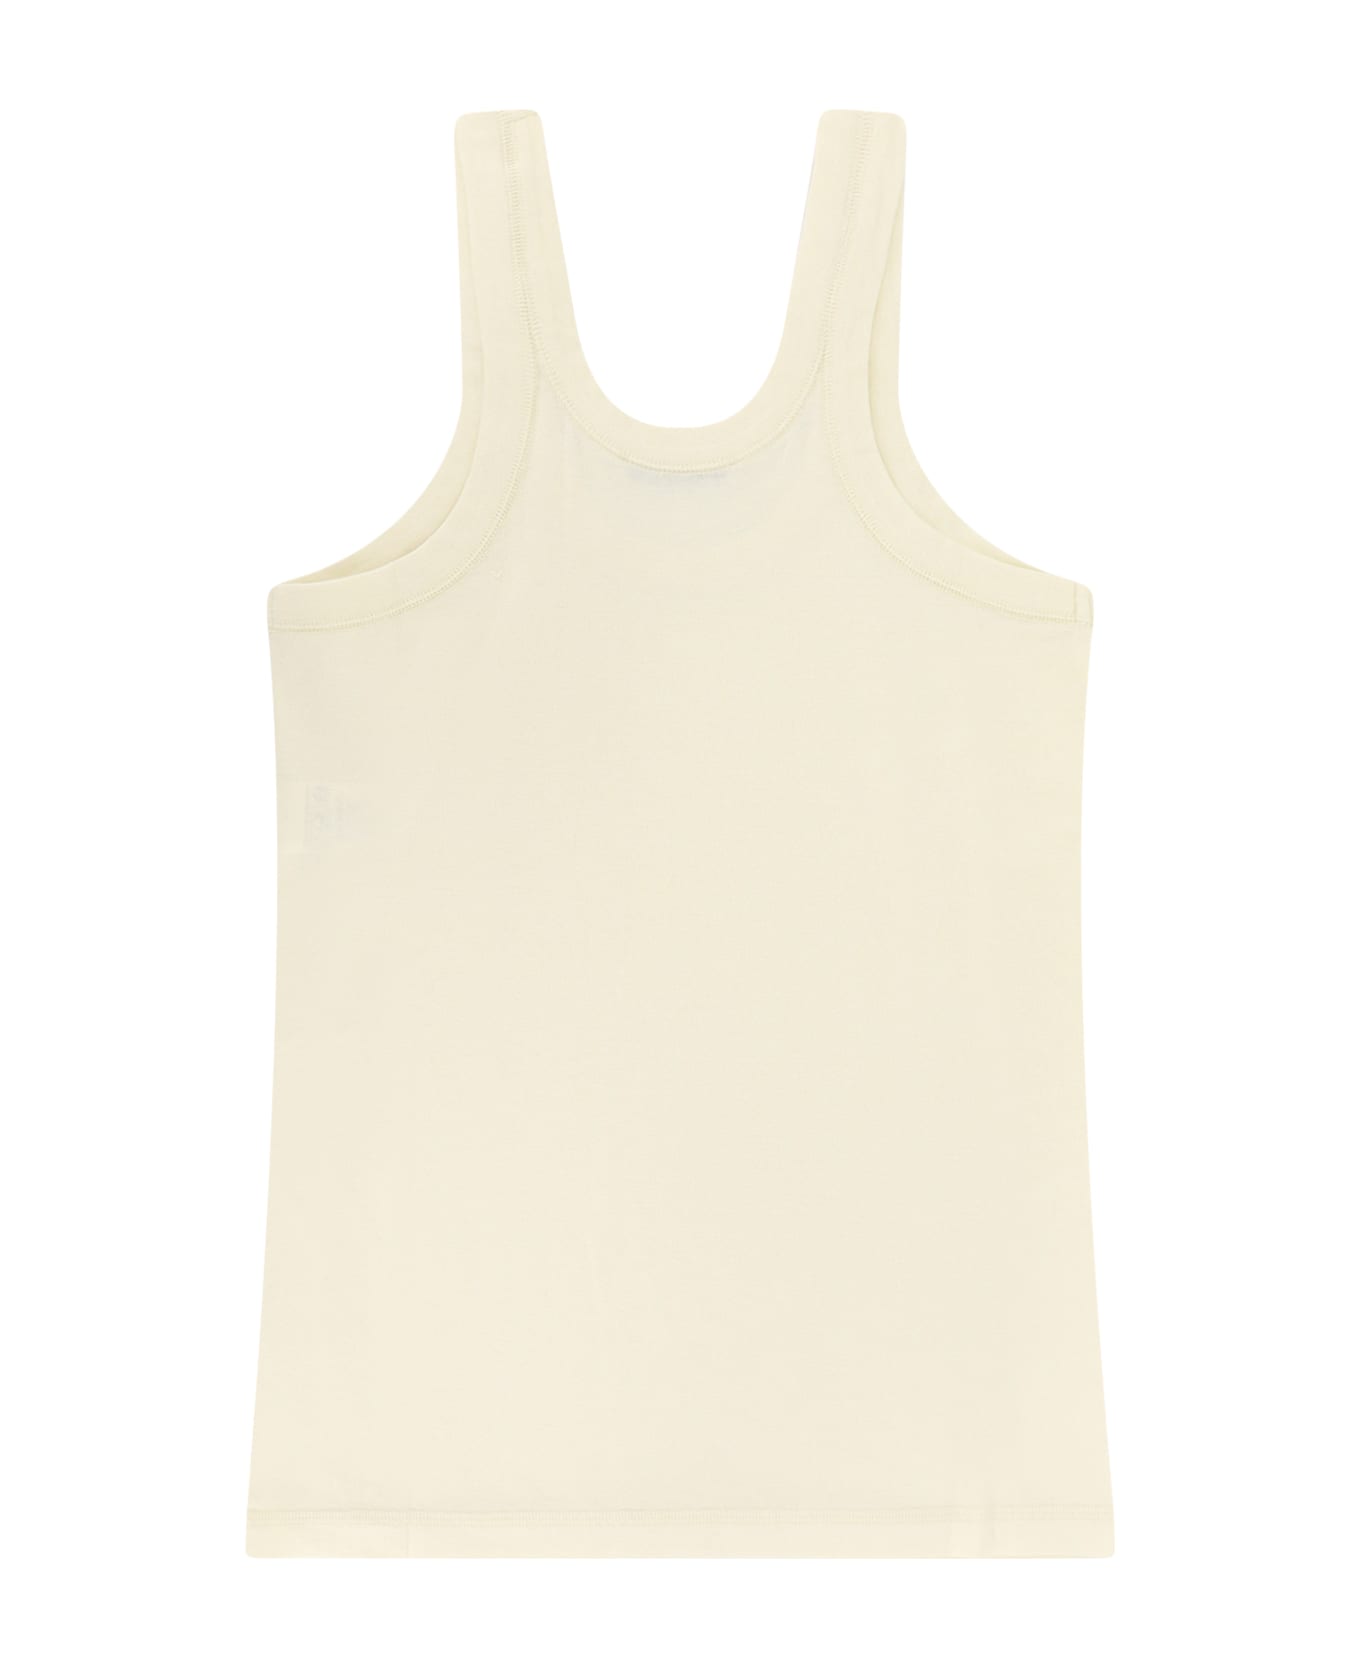 Lemaire Tank Top - IVORY